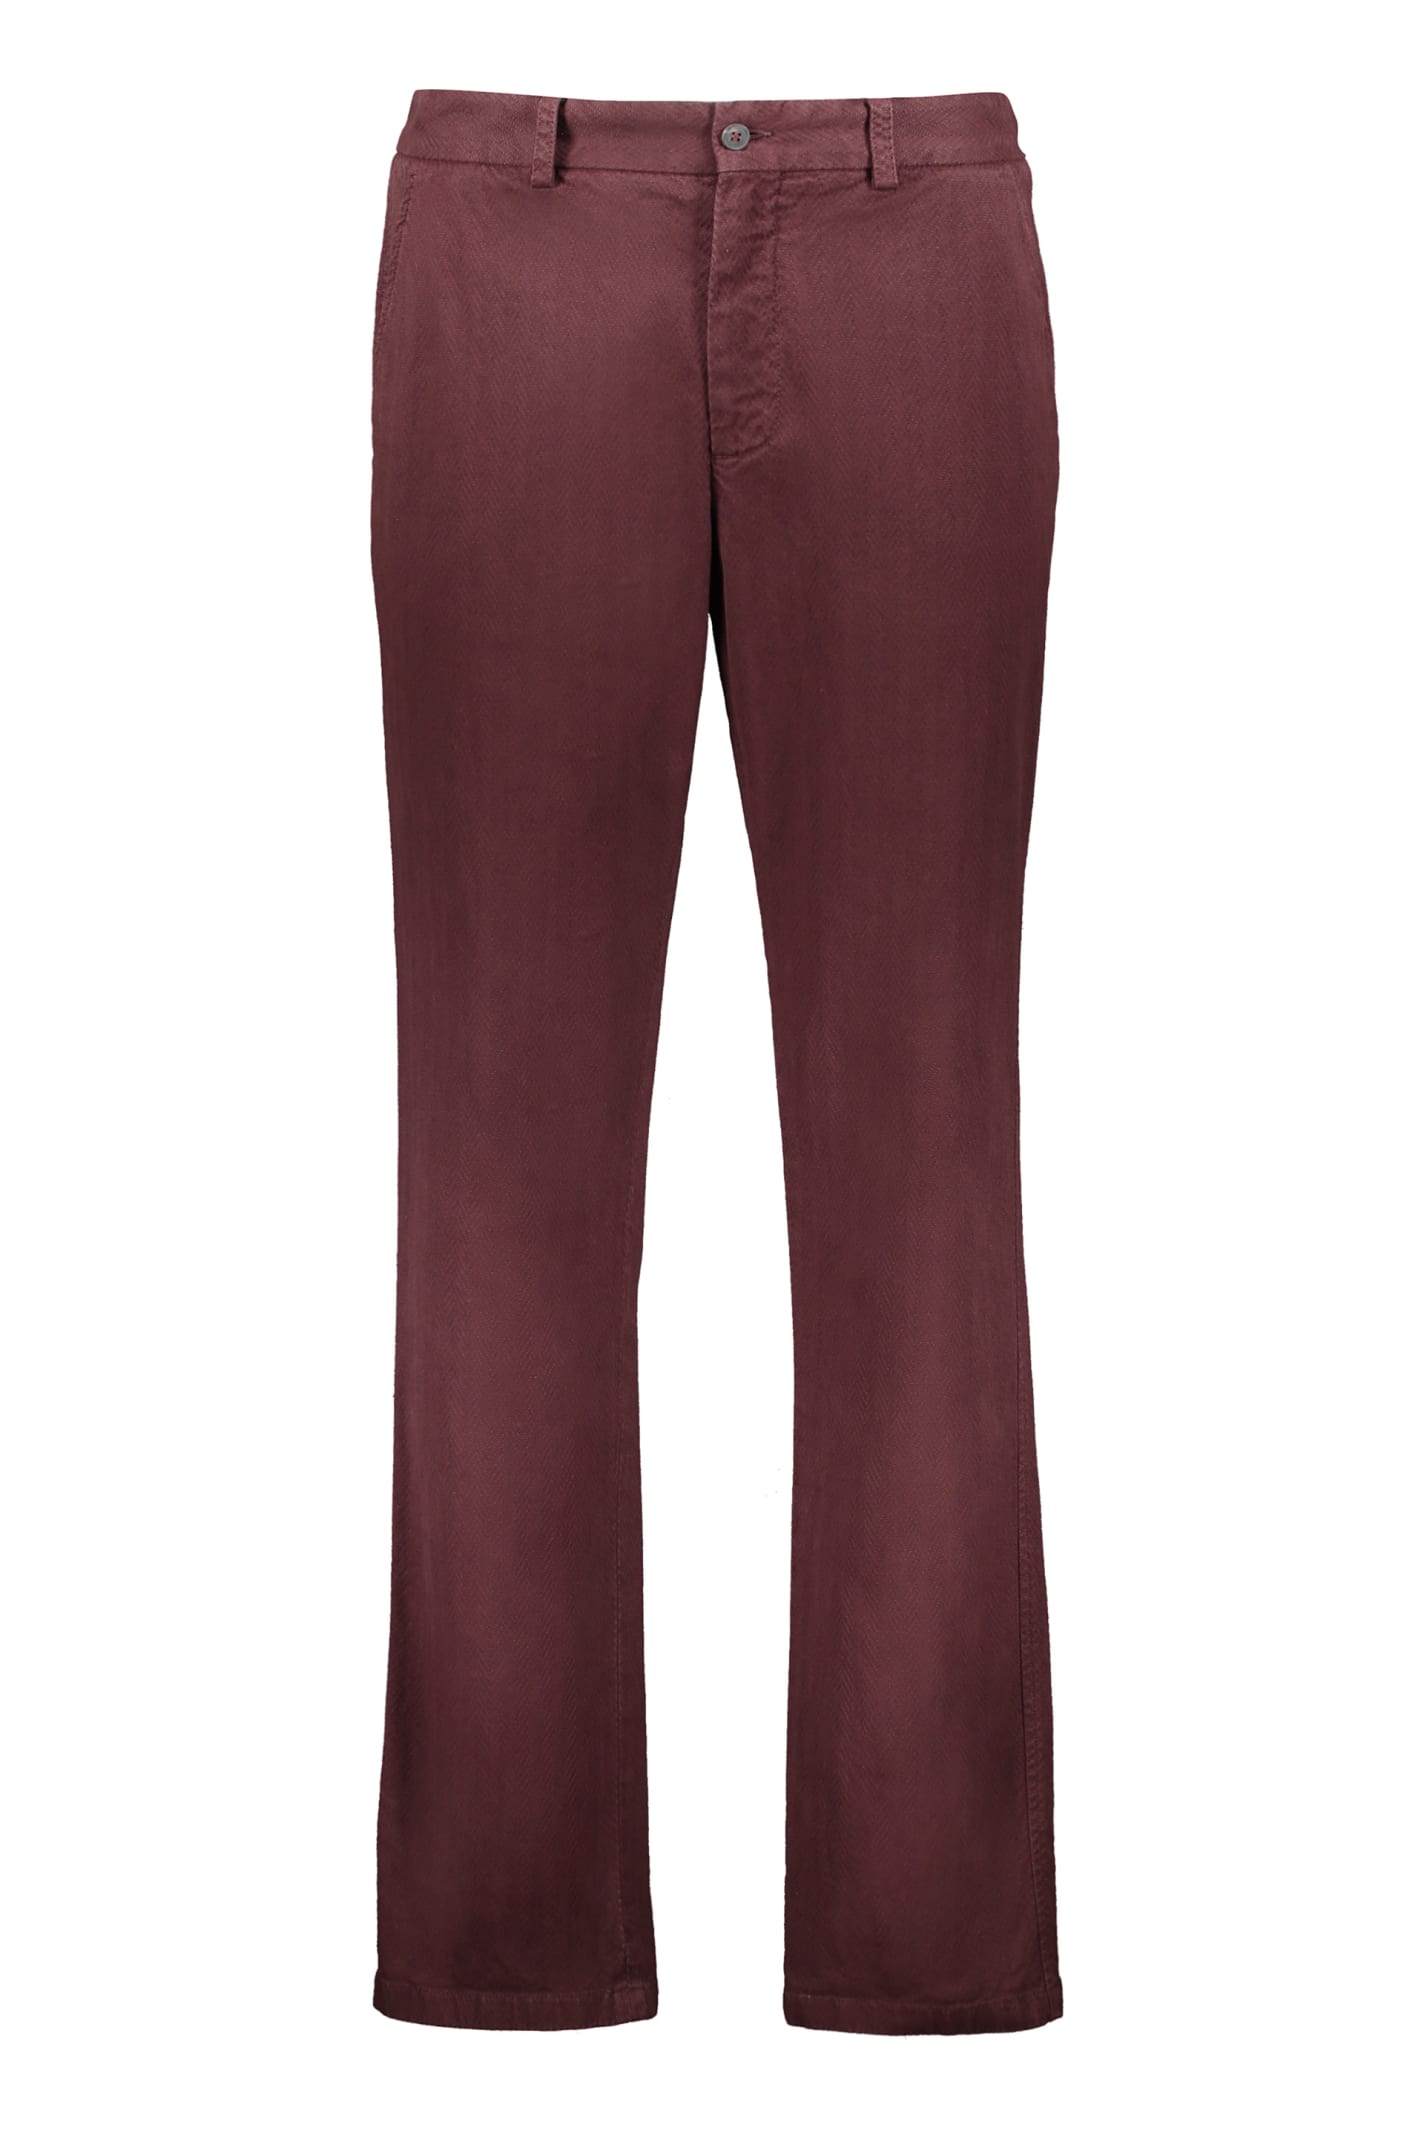 Missoni Cotton Trousers In Burgundy